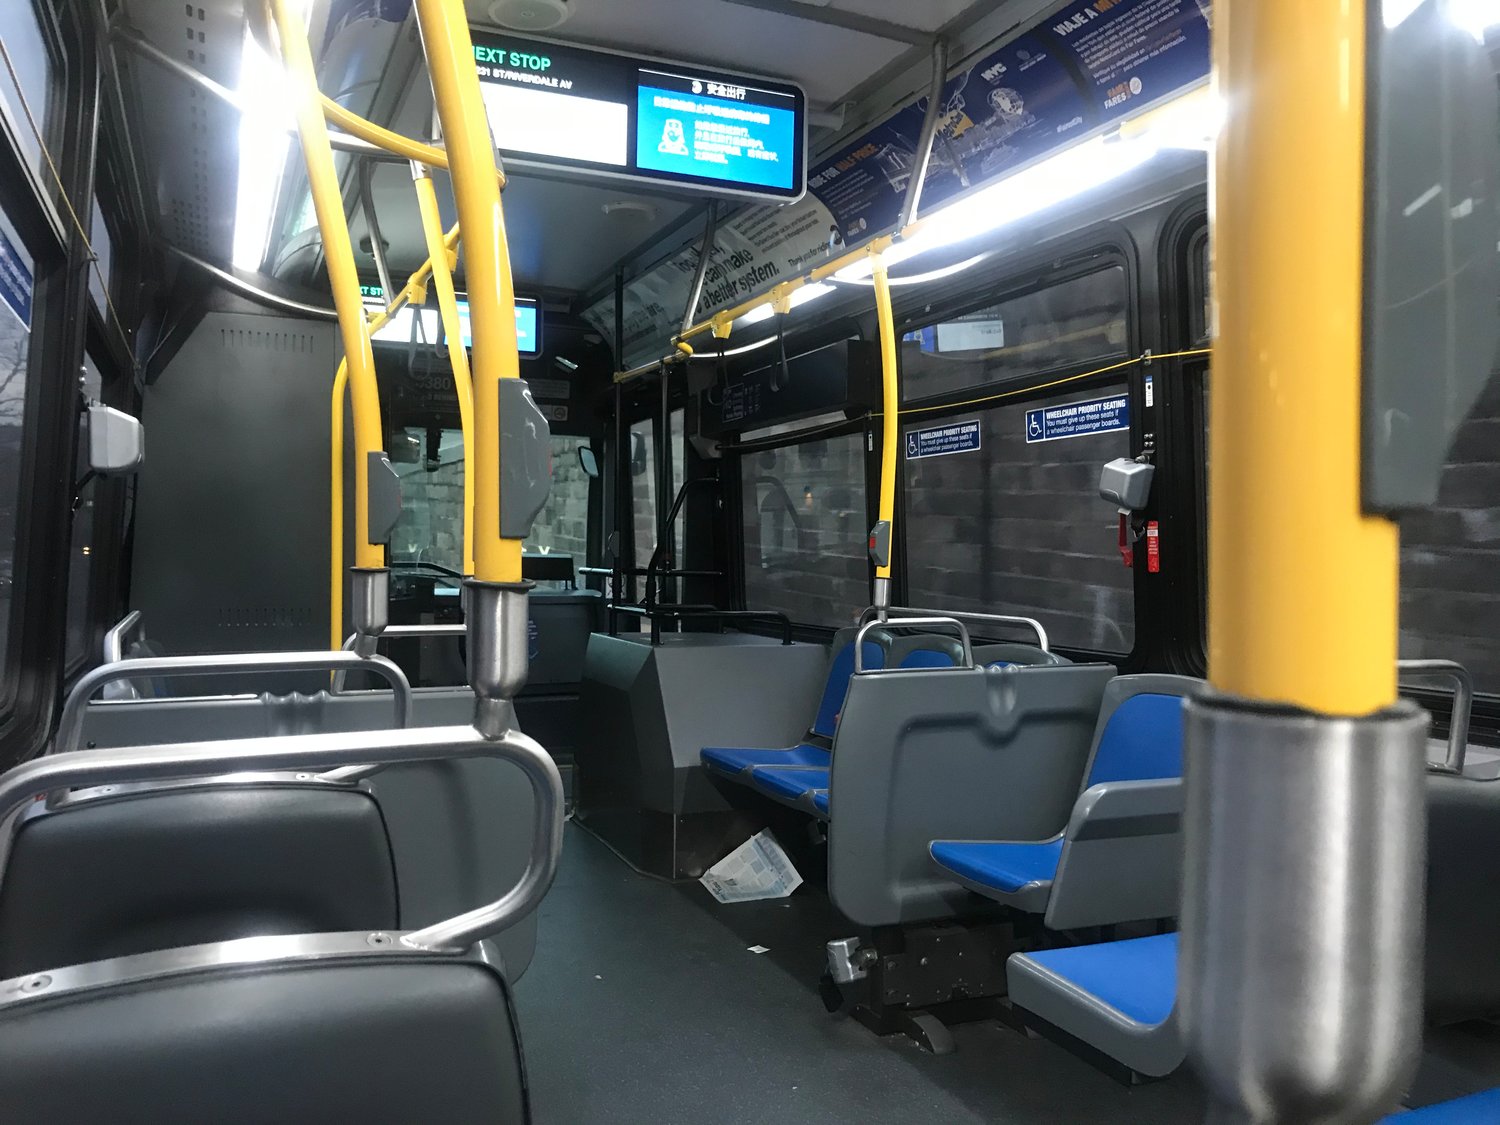 A near-empty Bx7 bus lumbers its way down Riverdale Avenue toward West 231st Street. Just hours before Gov. Andrew Cuomo locked down the state, few people were using mass transit.